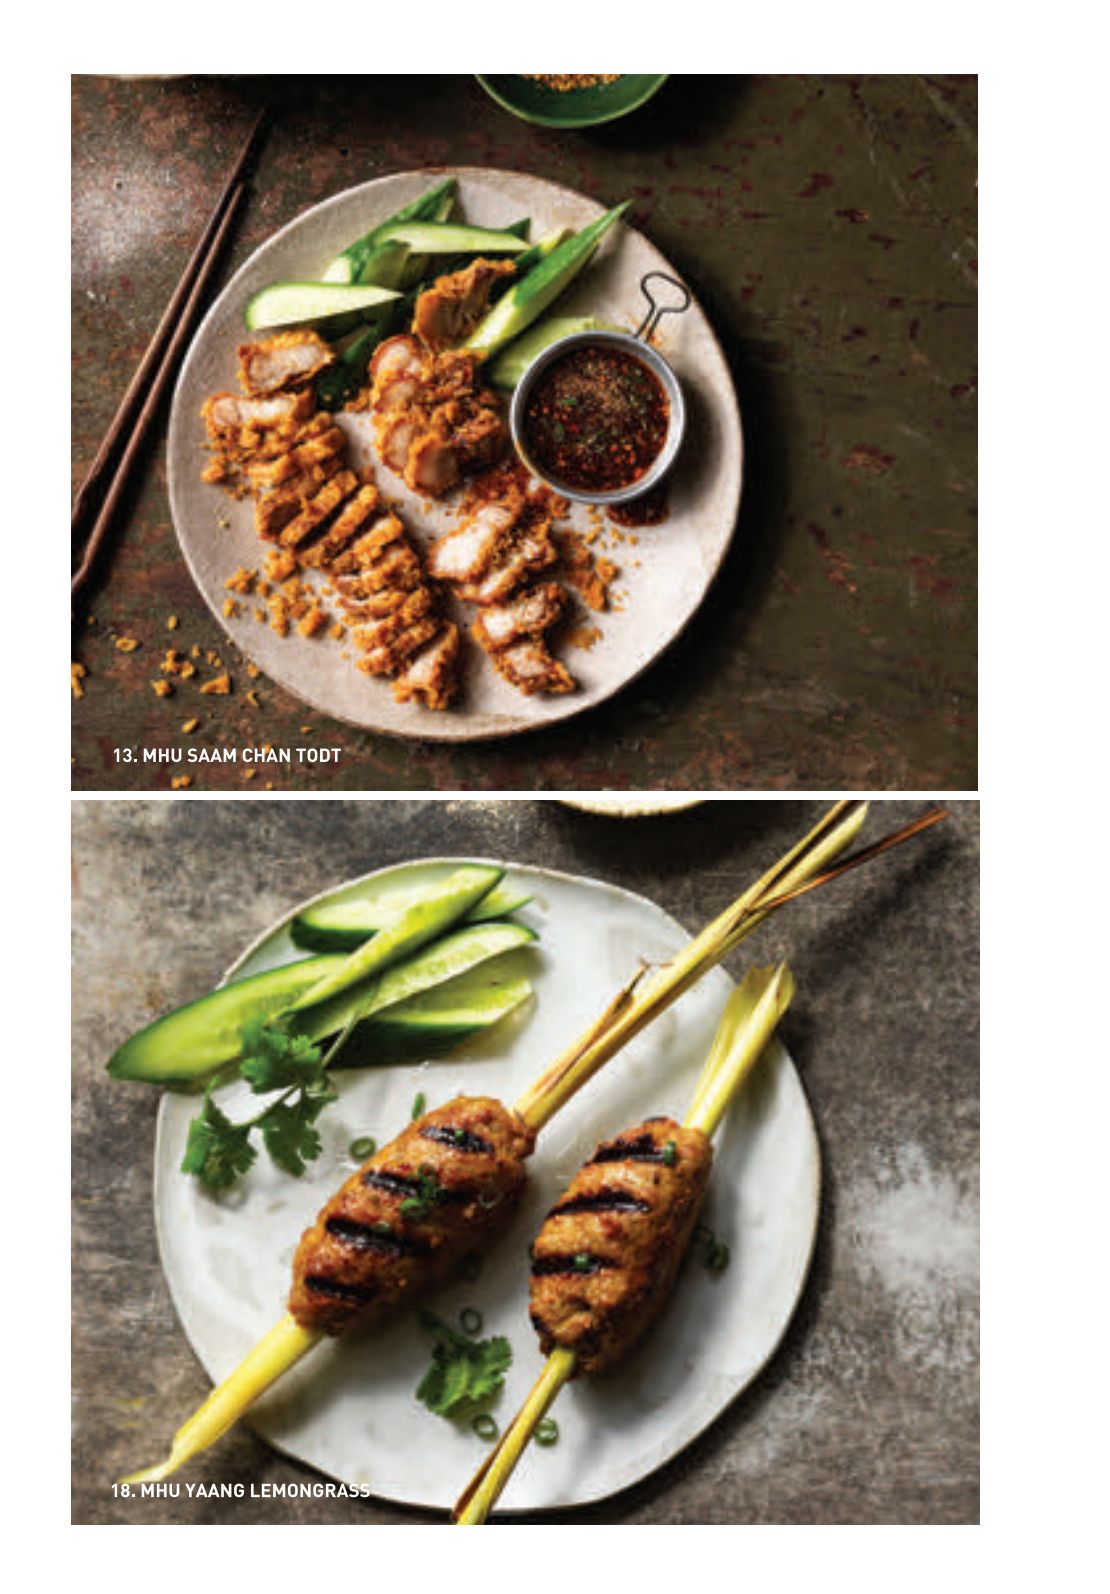 Grilled Pork Belly Skewers - Lord Byron's Kitchen